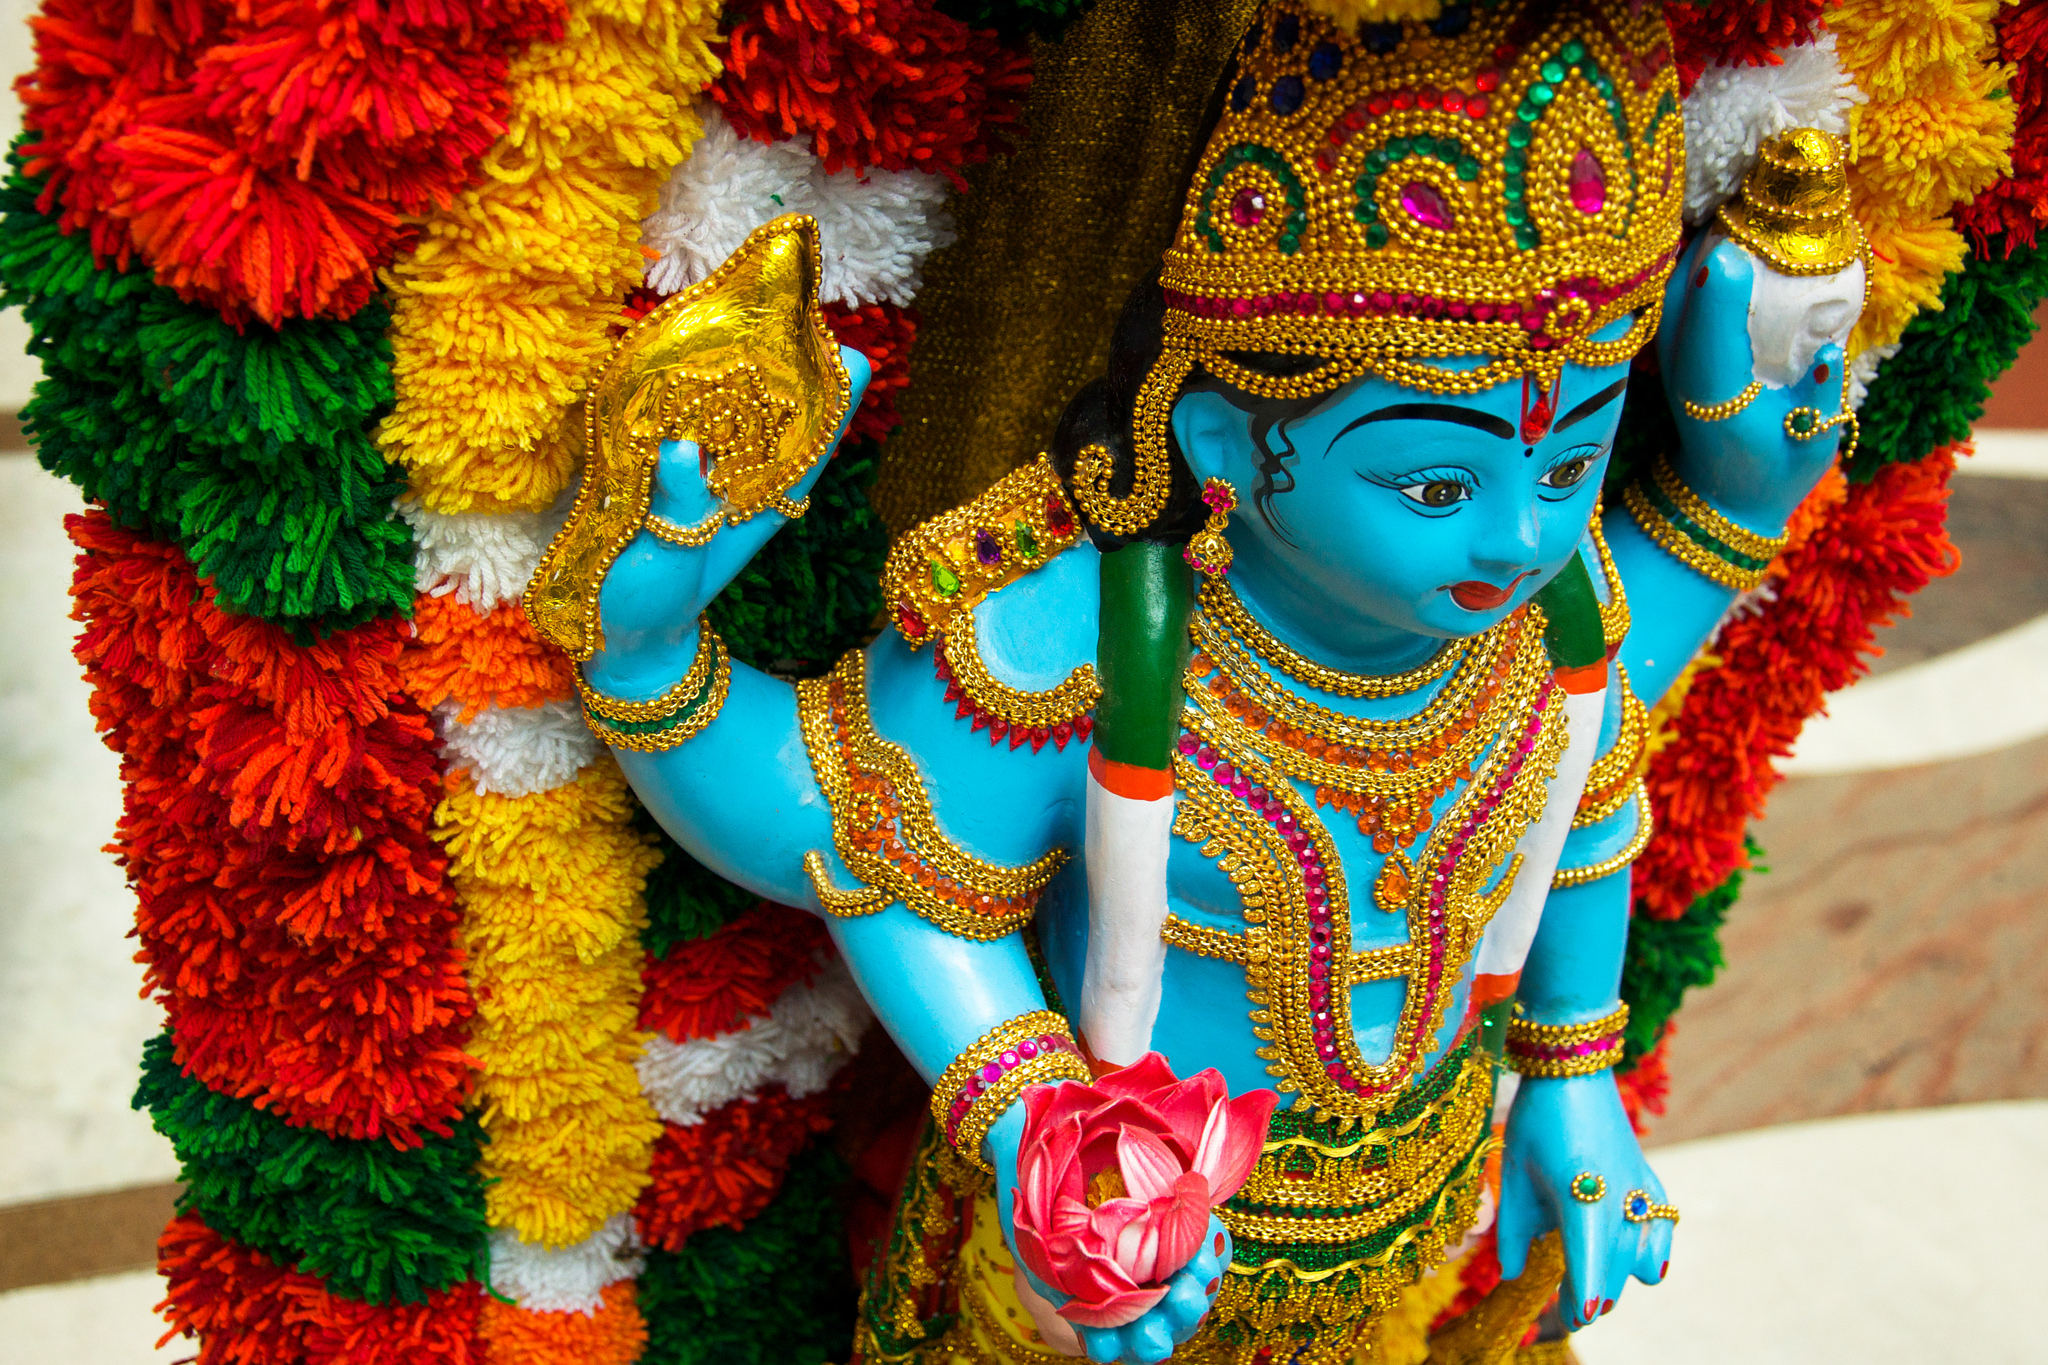 "Krishna" by Praveen, Flickr. Used according to Creative Commons license.